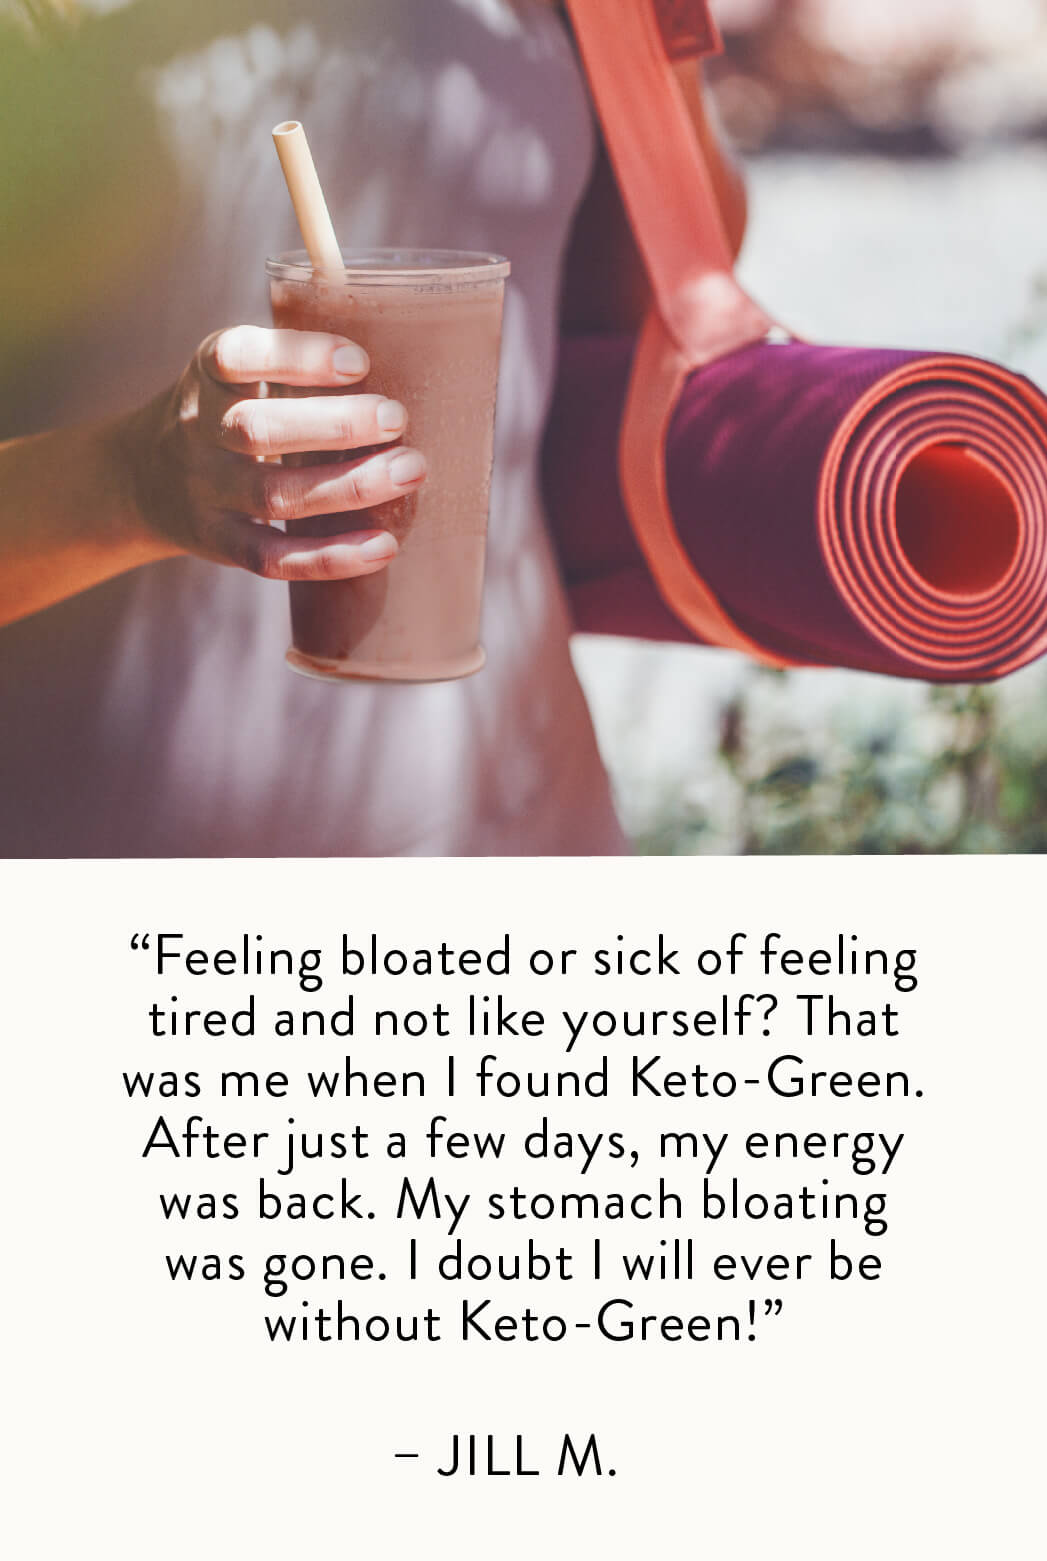 "Feeling bloated or sick of feeling tired and not like yourself? That was me when I found Keto-Green. After just a few days, my energy was back! My stomach bloating was gone! I doubt I will ever be without Keto-Green" — Jill M. 